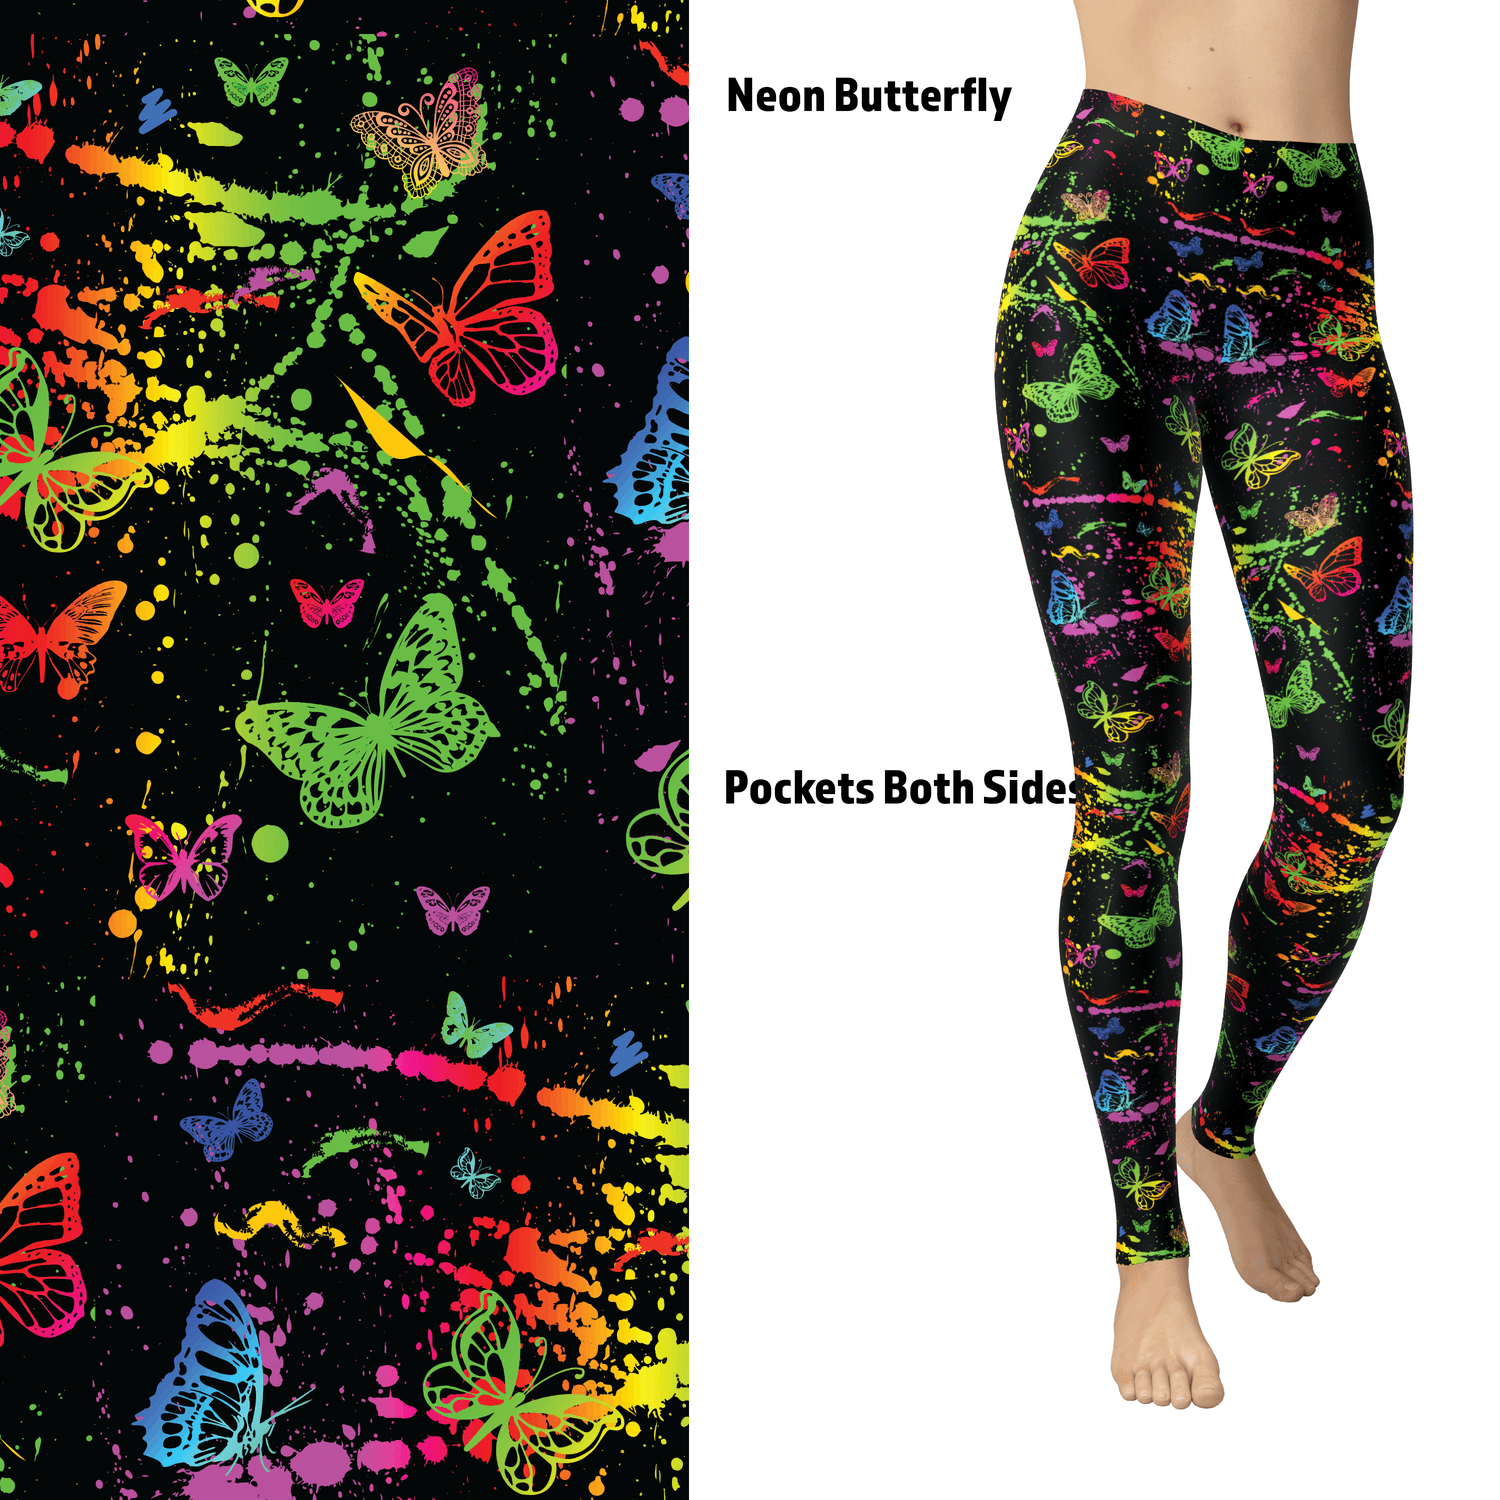 Neon Butterfly Leggings with pockets - OS